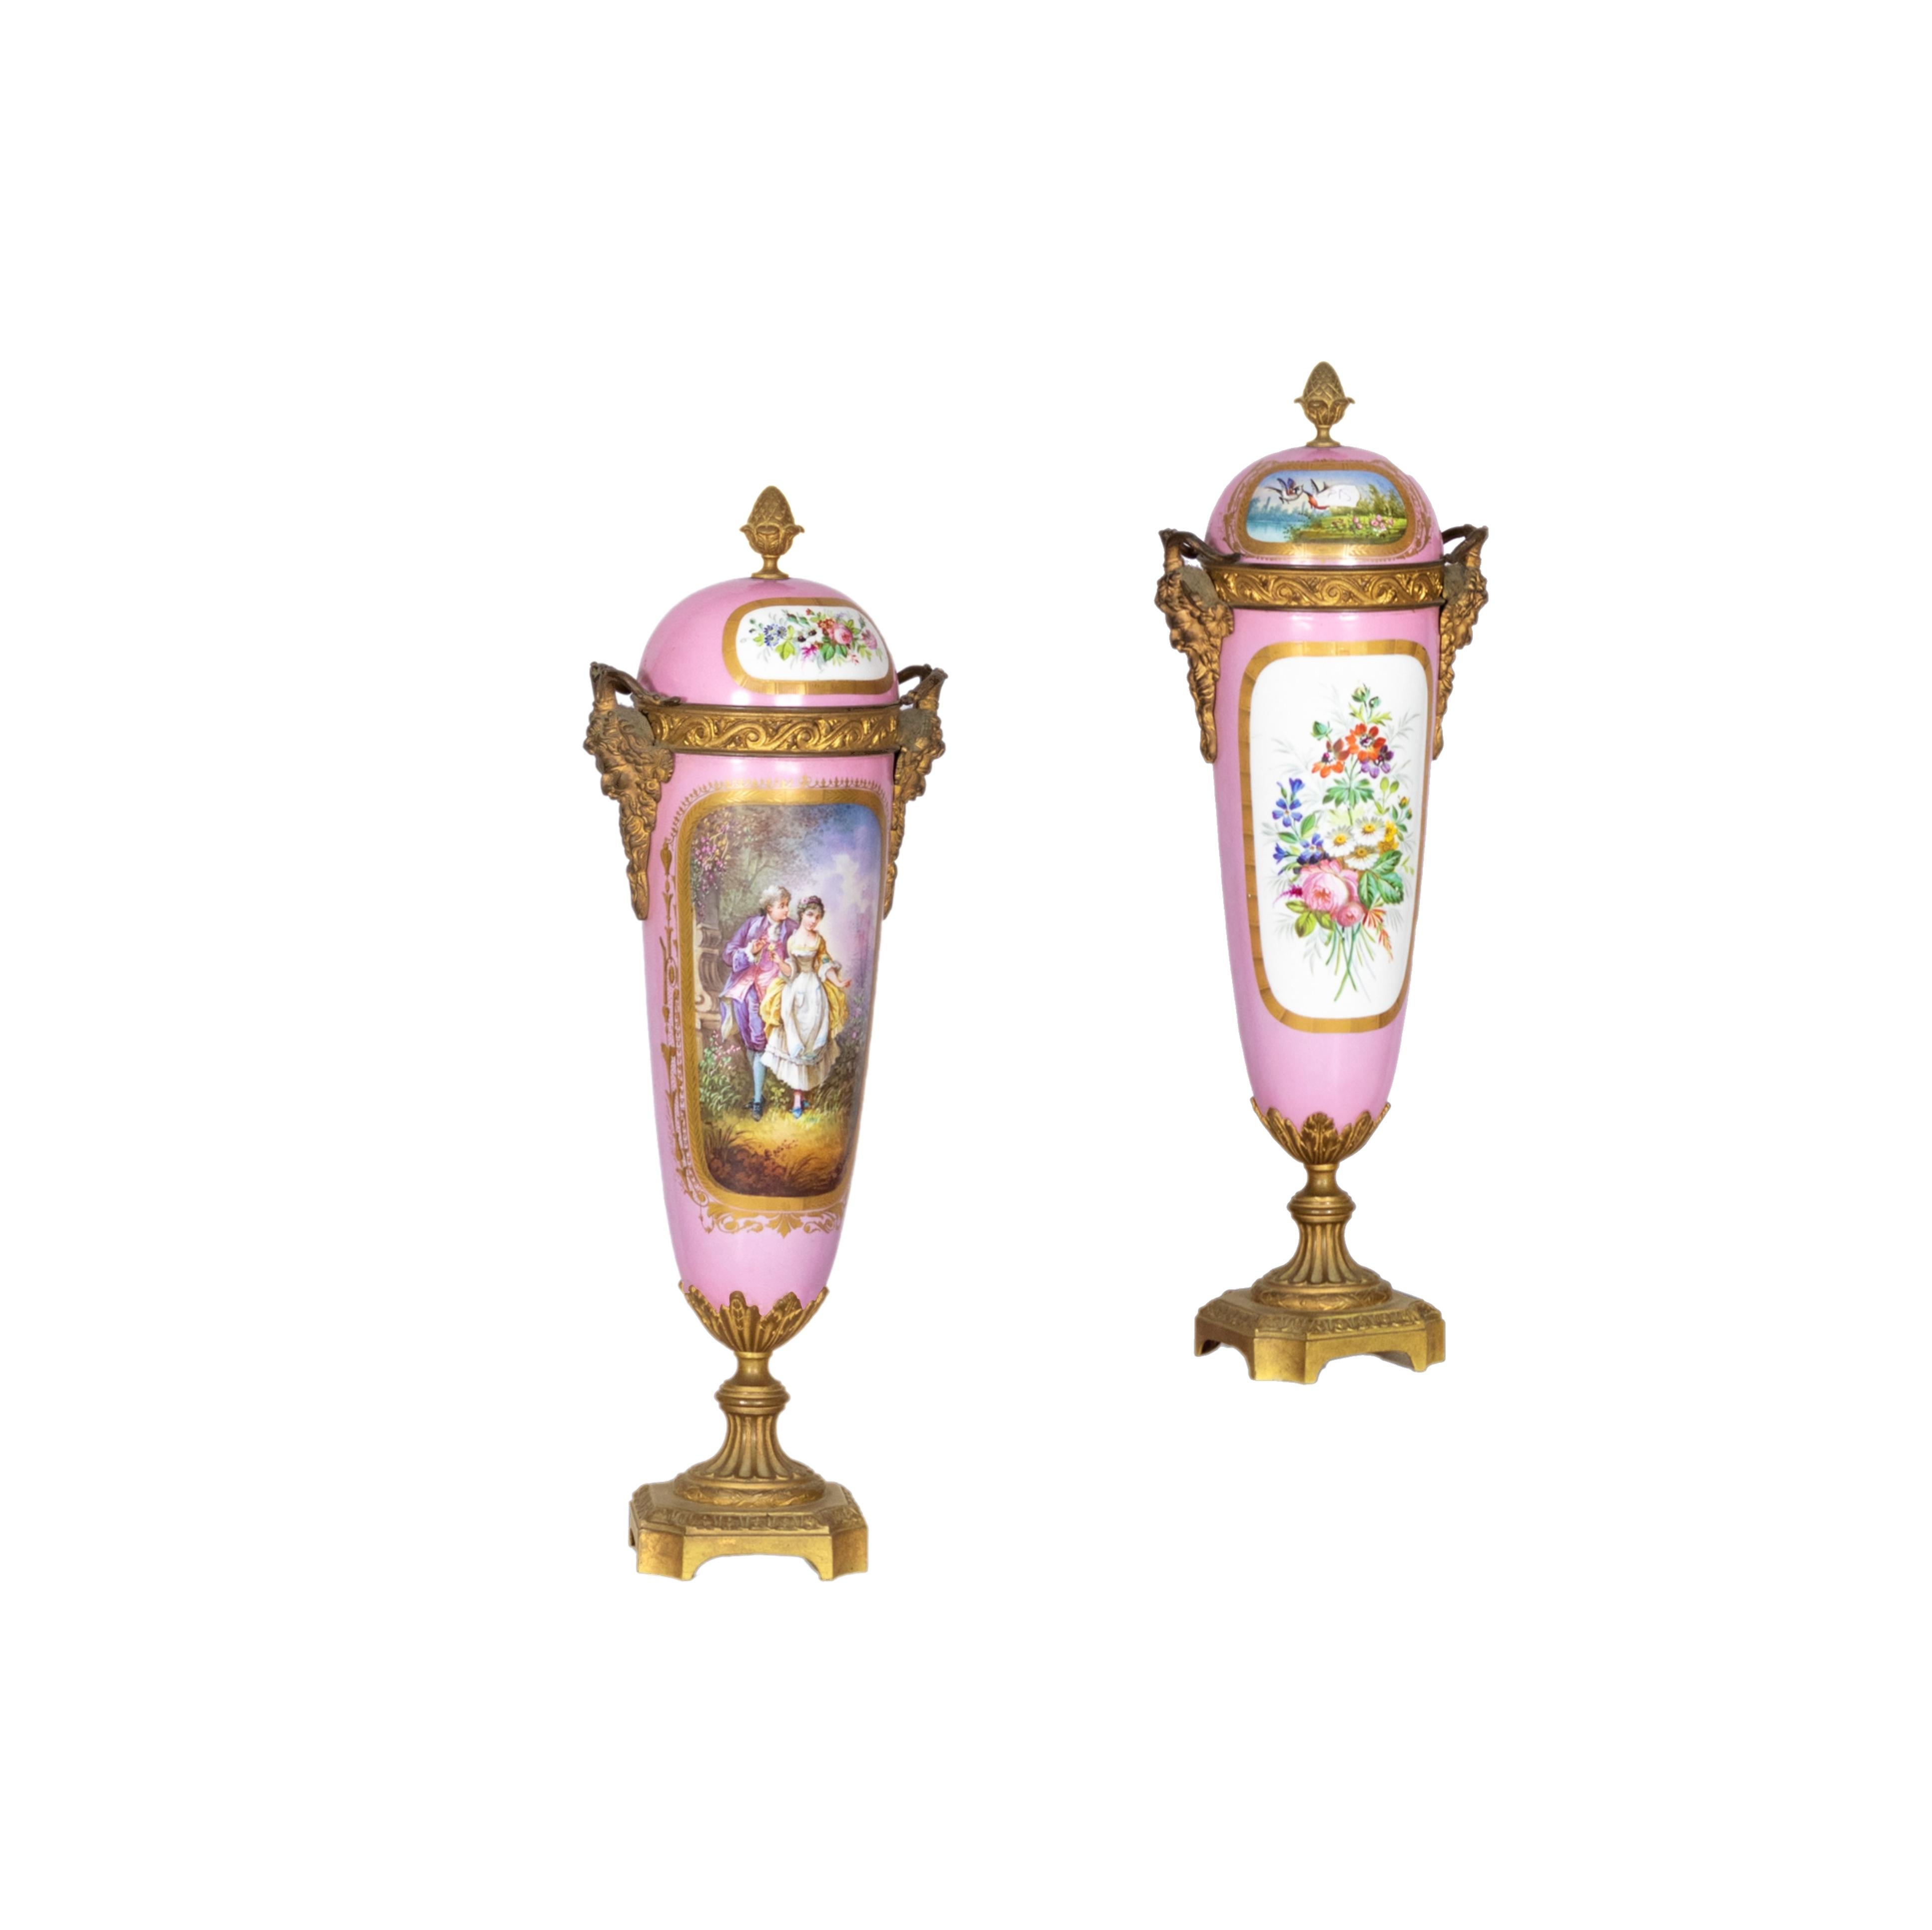 A beautiful antique decorative pink porcelain Sèvres urn with a hand-painted background of a lovers scene. 

In the back there is a scene of a bouquet of flowers. Mounted Bacchus/ Dionysus bronze mask handles on the sides. ‘A Daret’ signature on the